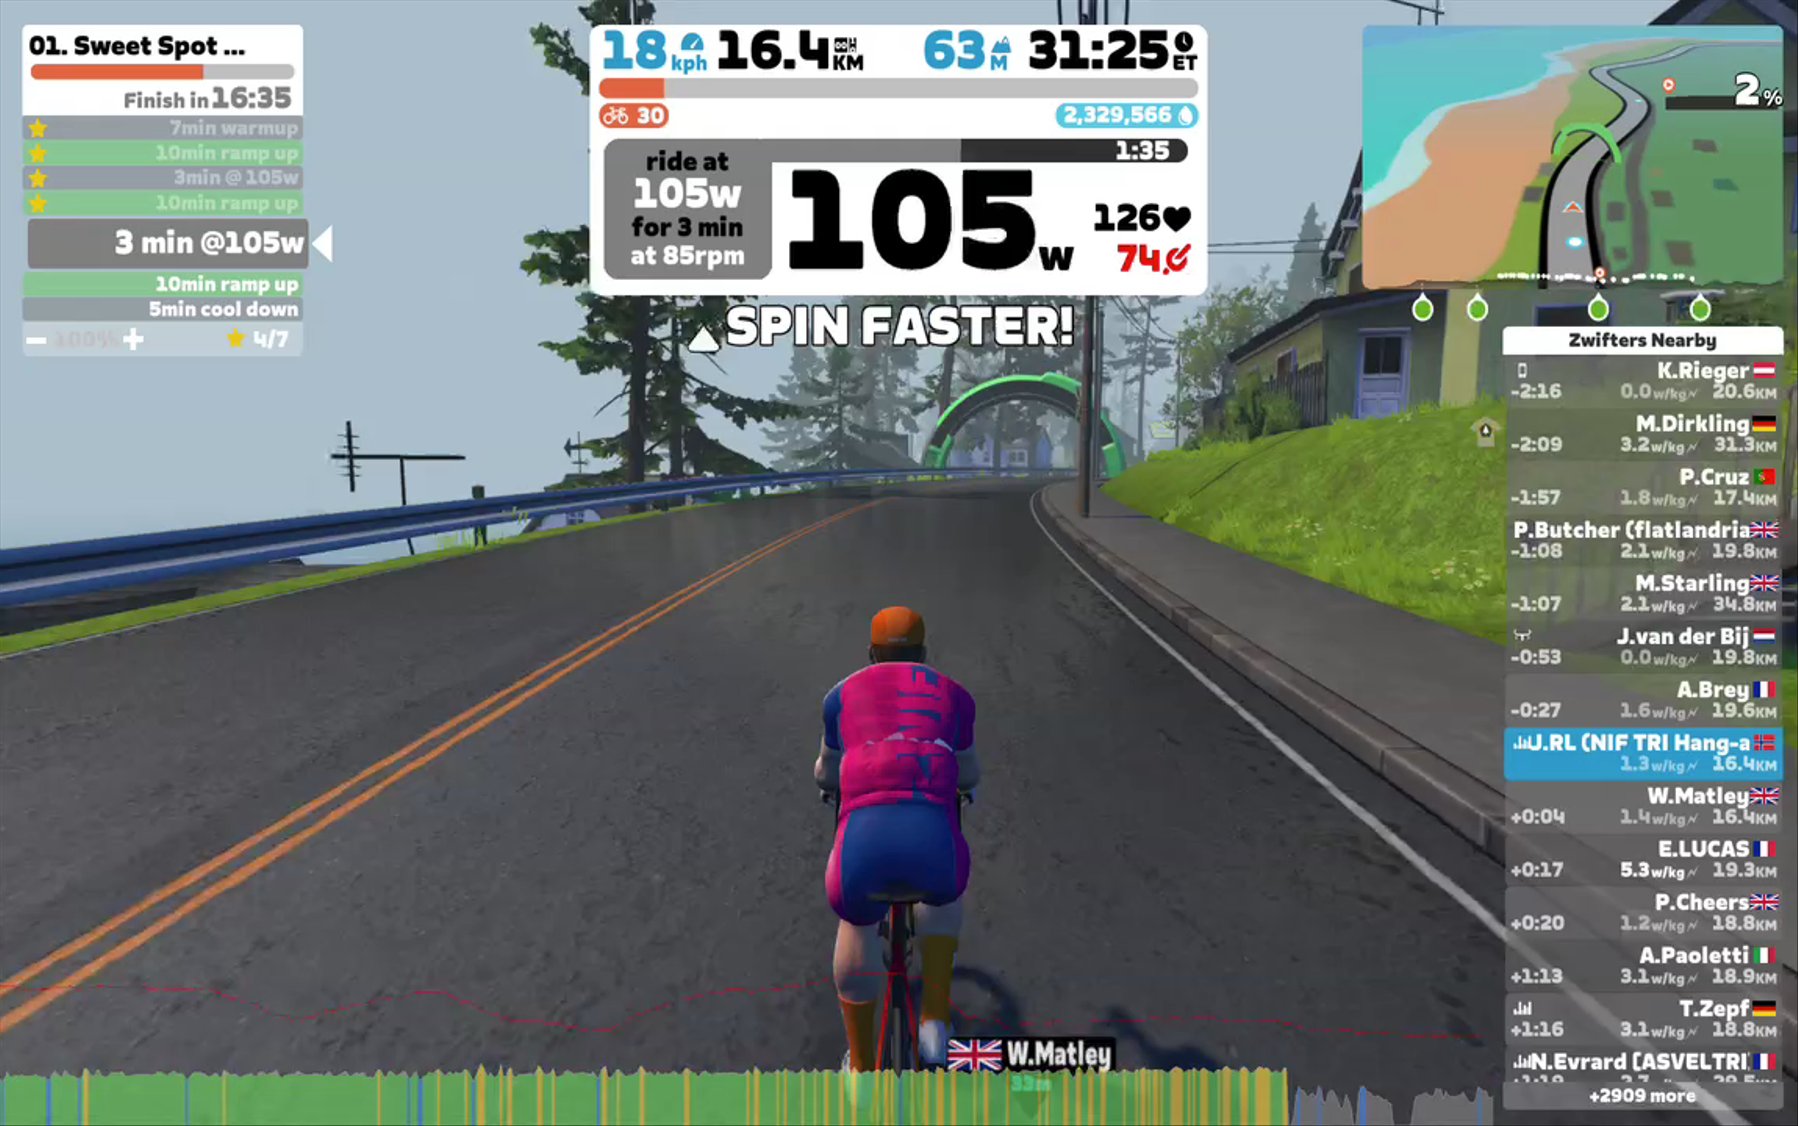 Zwift - 01. Sweet Spot Foundation on Countryside Tour in Watopia